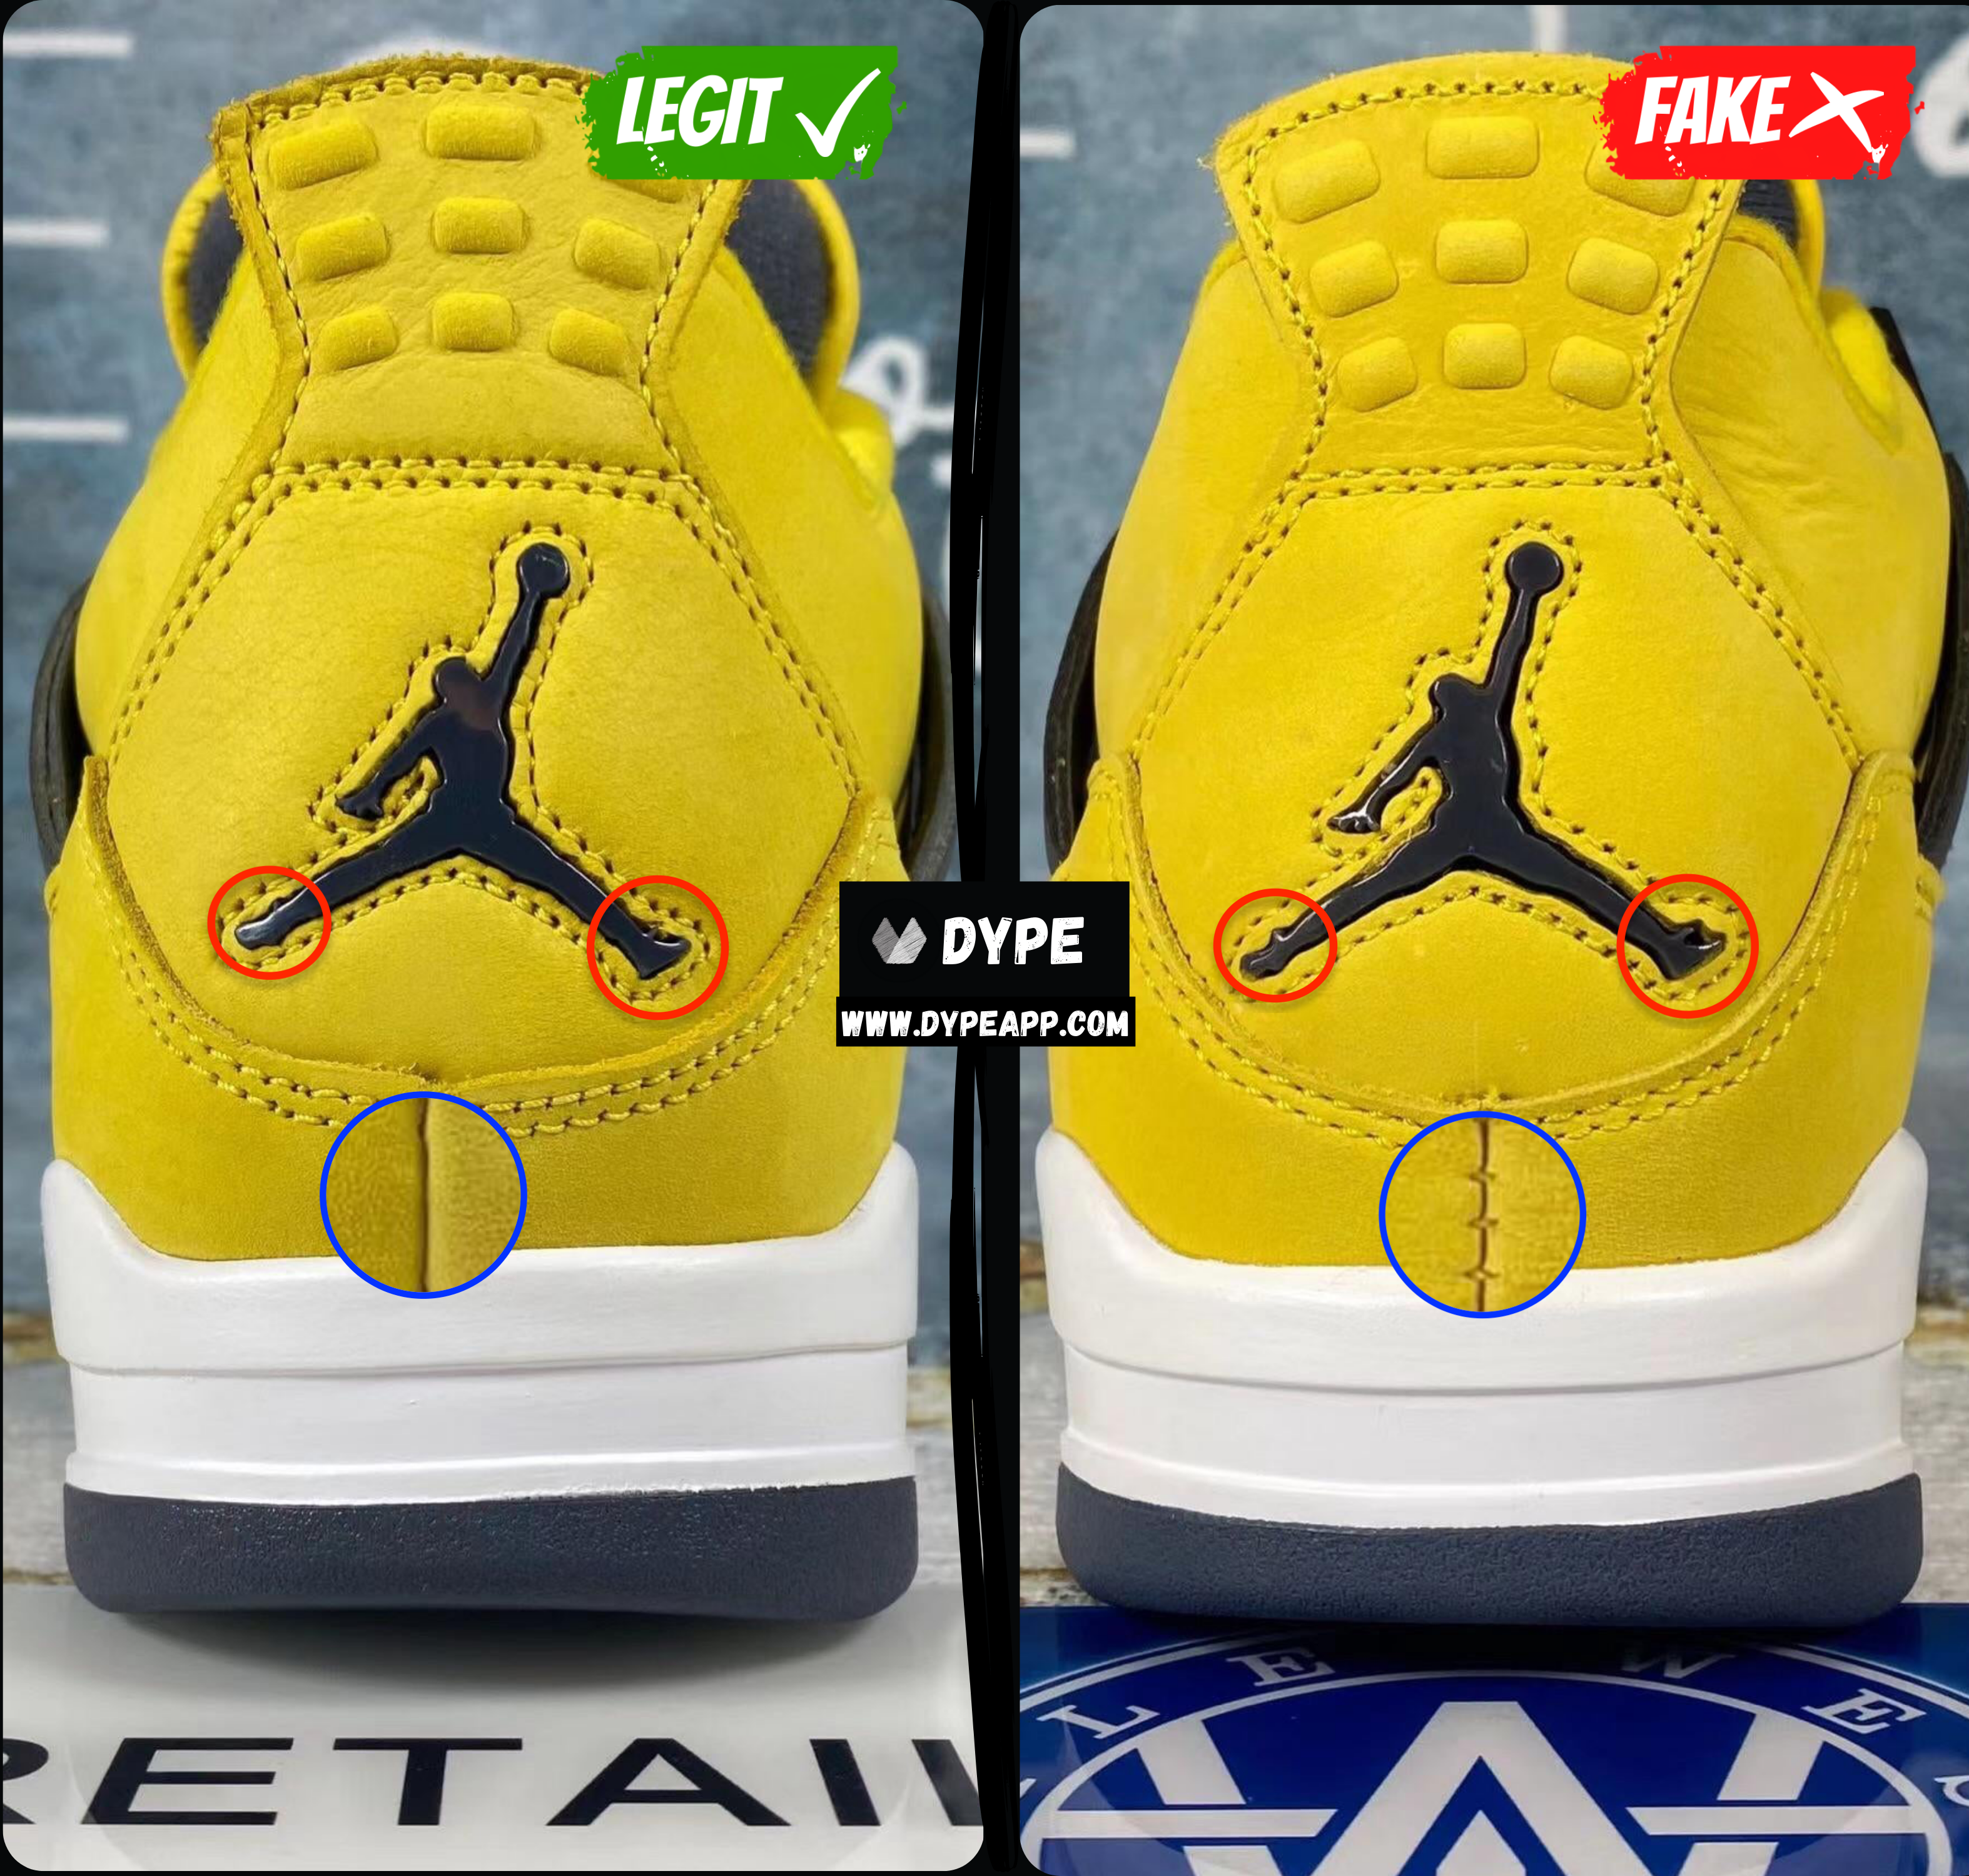 How do I know if my jordan retro 4 are original? Find out in 5